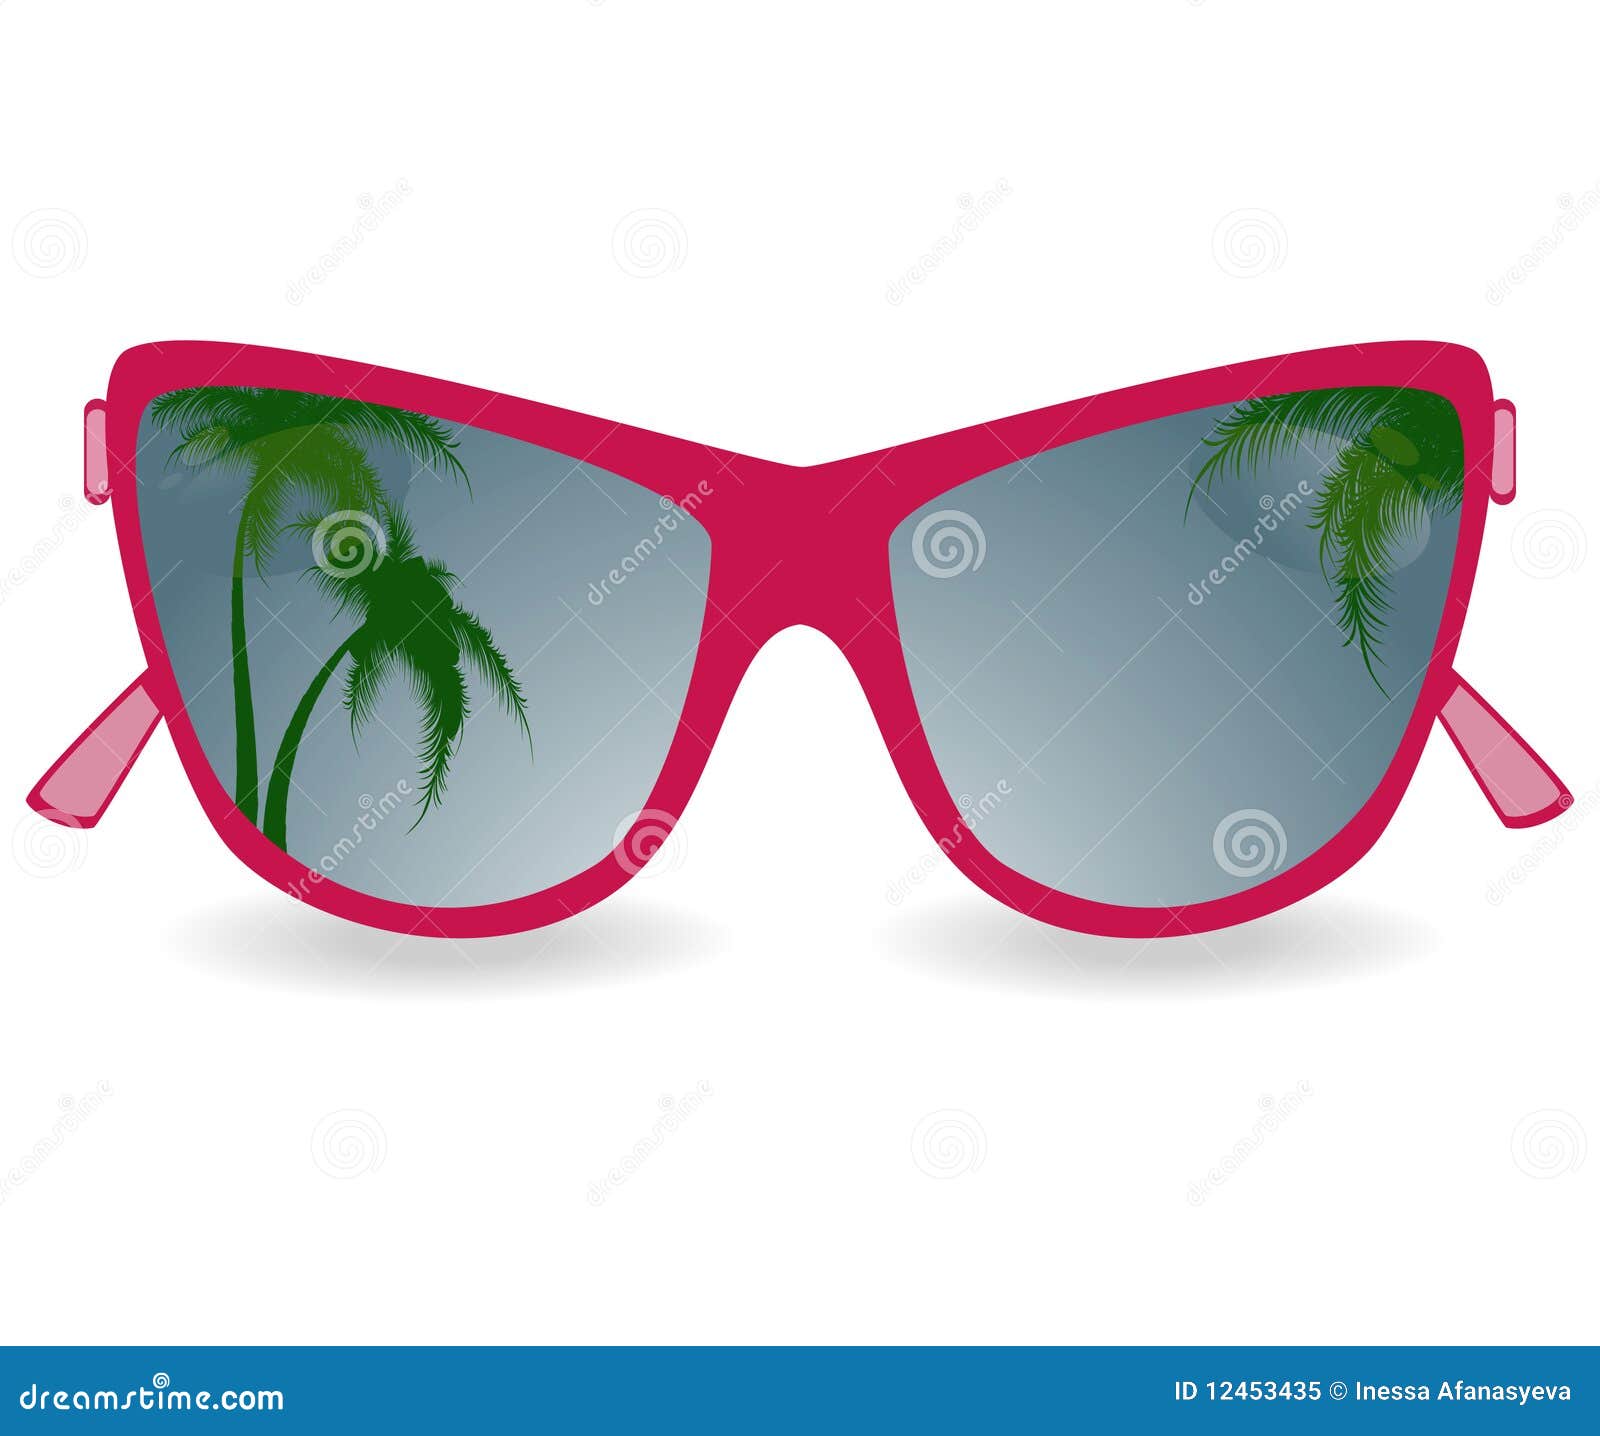 sun glasses with reflexion of palm trees